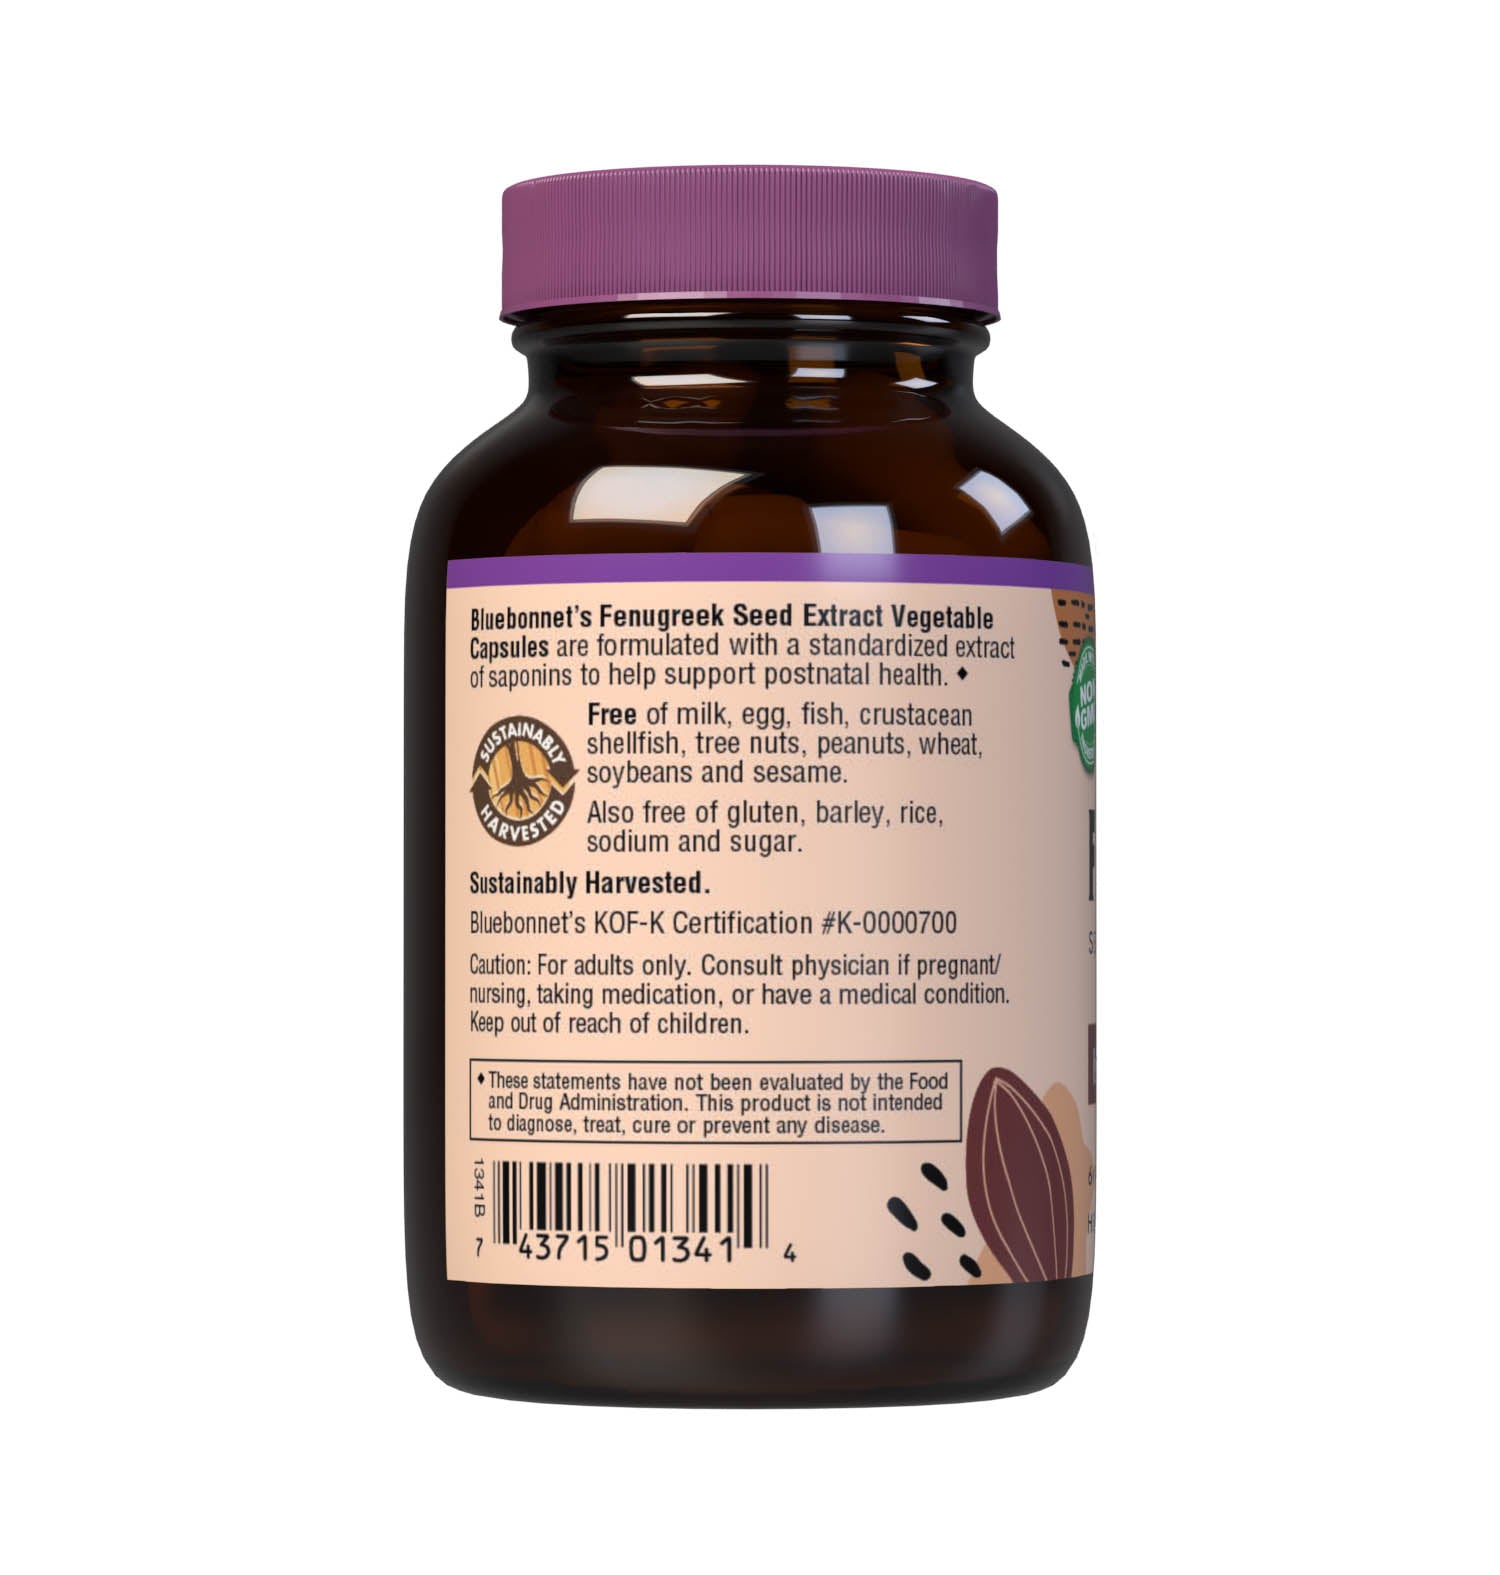 Bluebonnet’s Fenugreek Seed Extract 60 Vegetable Capsules provide a standardized extract of total saponins, the most researched active constituents found in fenugreek. A clean and gentle water-based extraction method is employed to capture and preserve fenugreek’s most valuable components. Description panel. #size_60 count